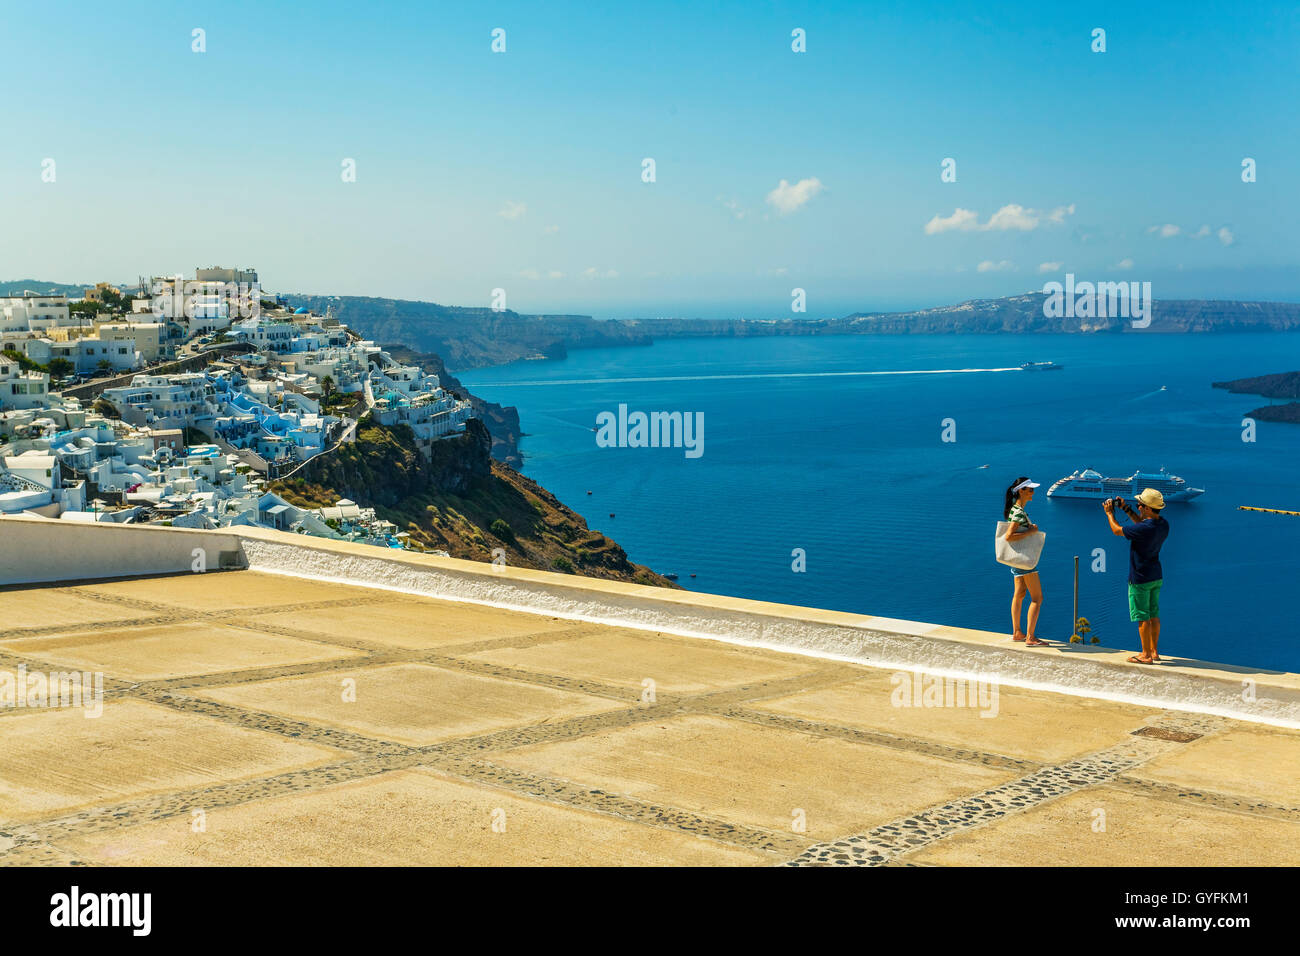 Young and actractive couple of Asiatic tourist taking pictures on a terrace in Thira, Fira, Santorini, Greece Stock Photo